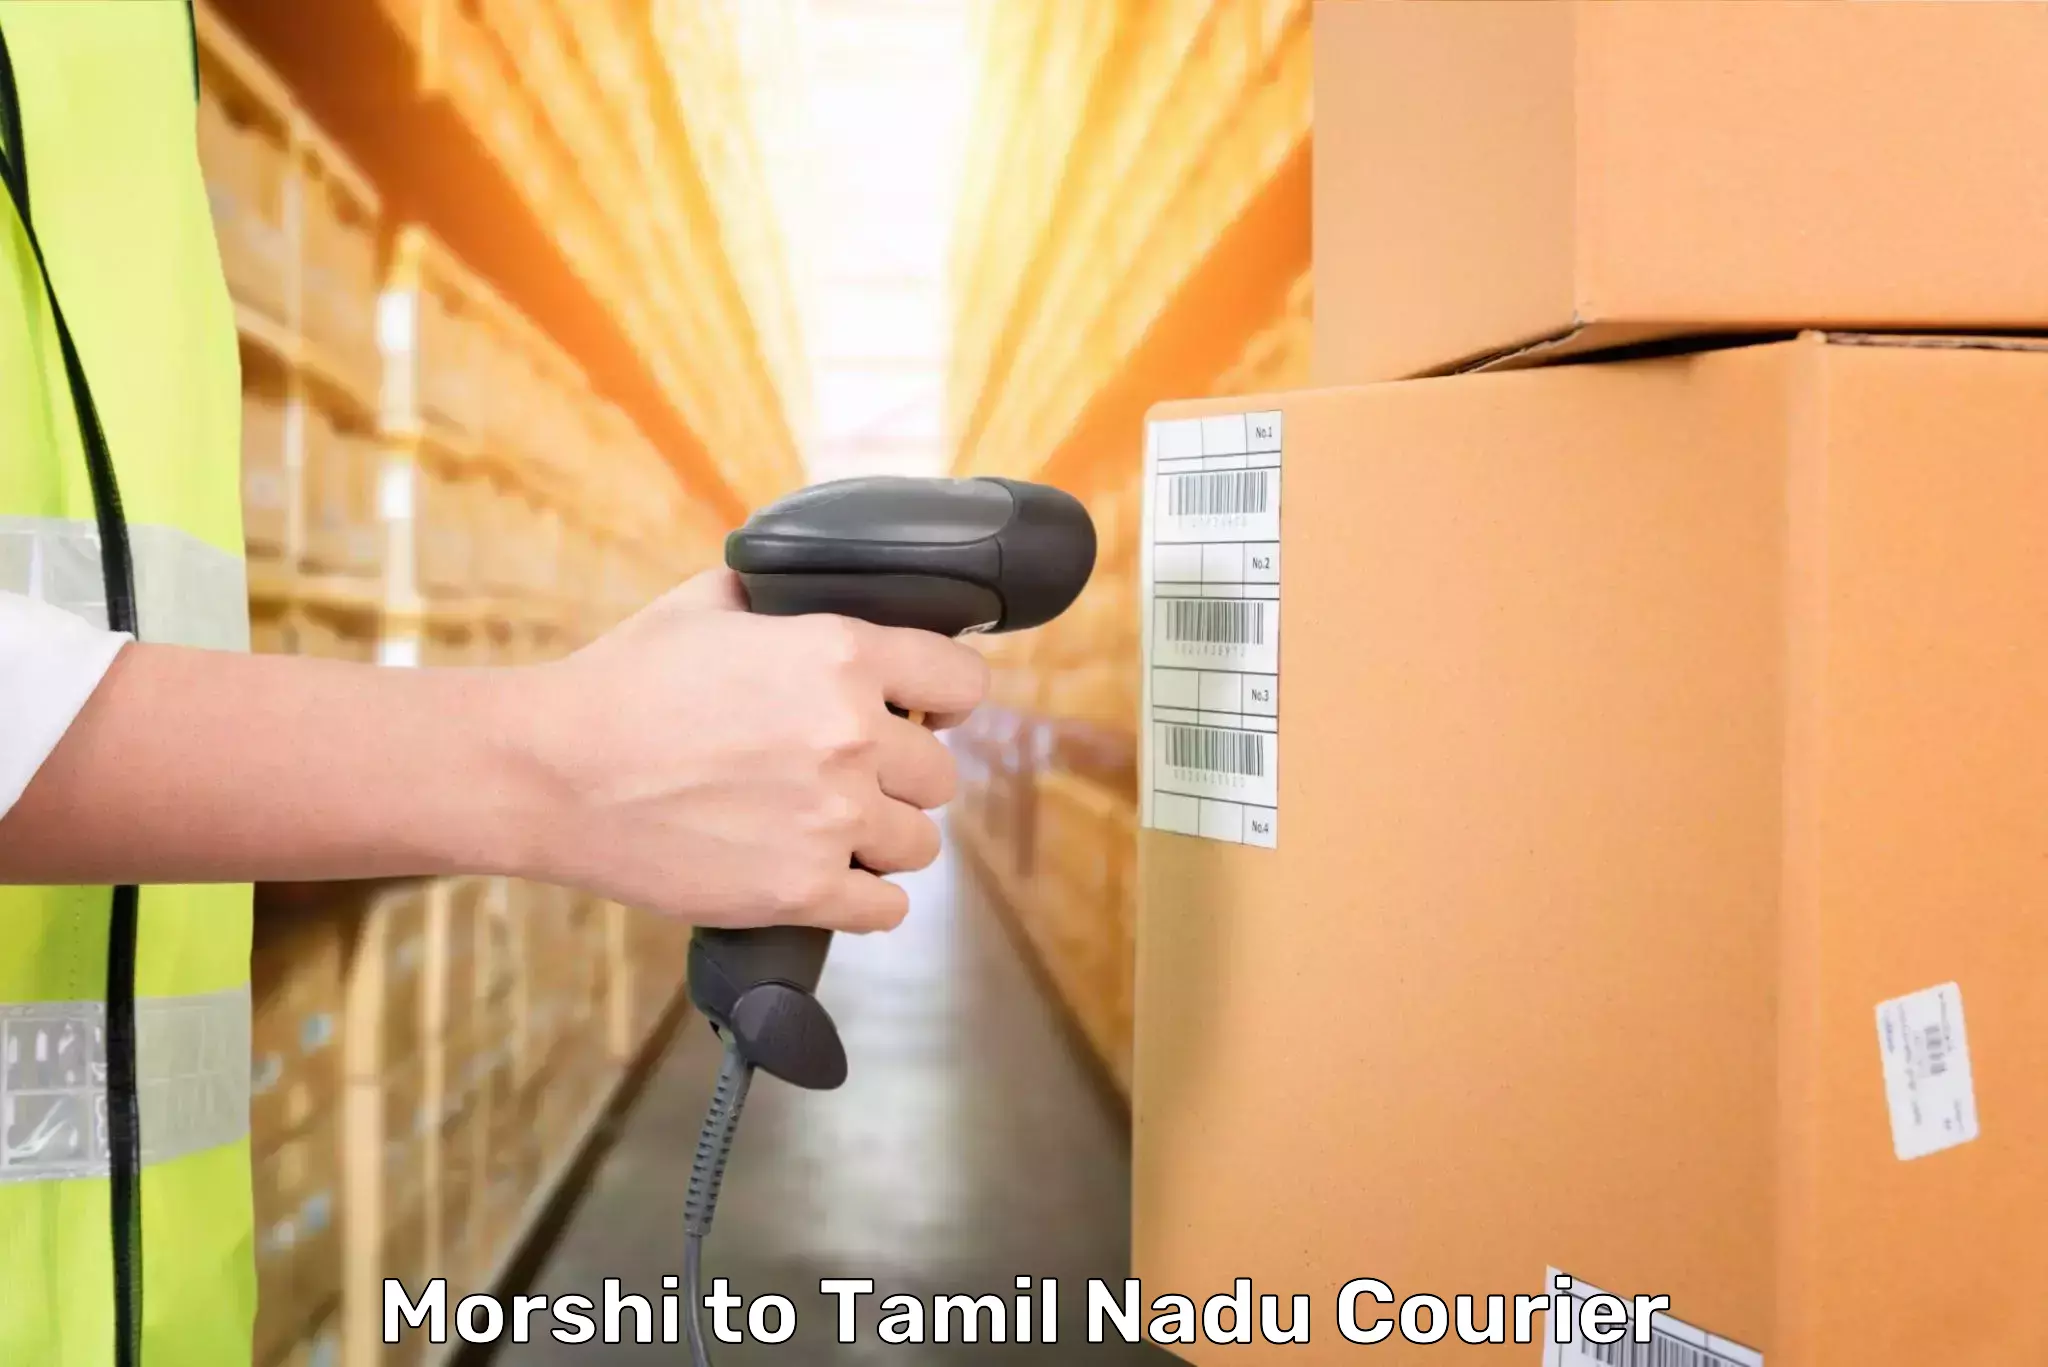 Luggage transport service in Morshi to Sri Ramachandra Institute of Higher Education and Research Chennai